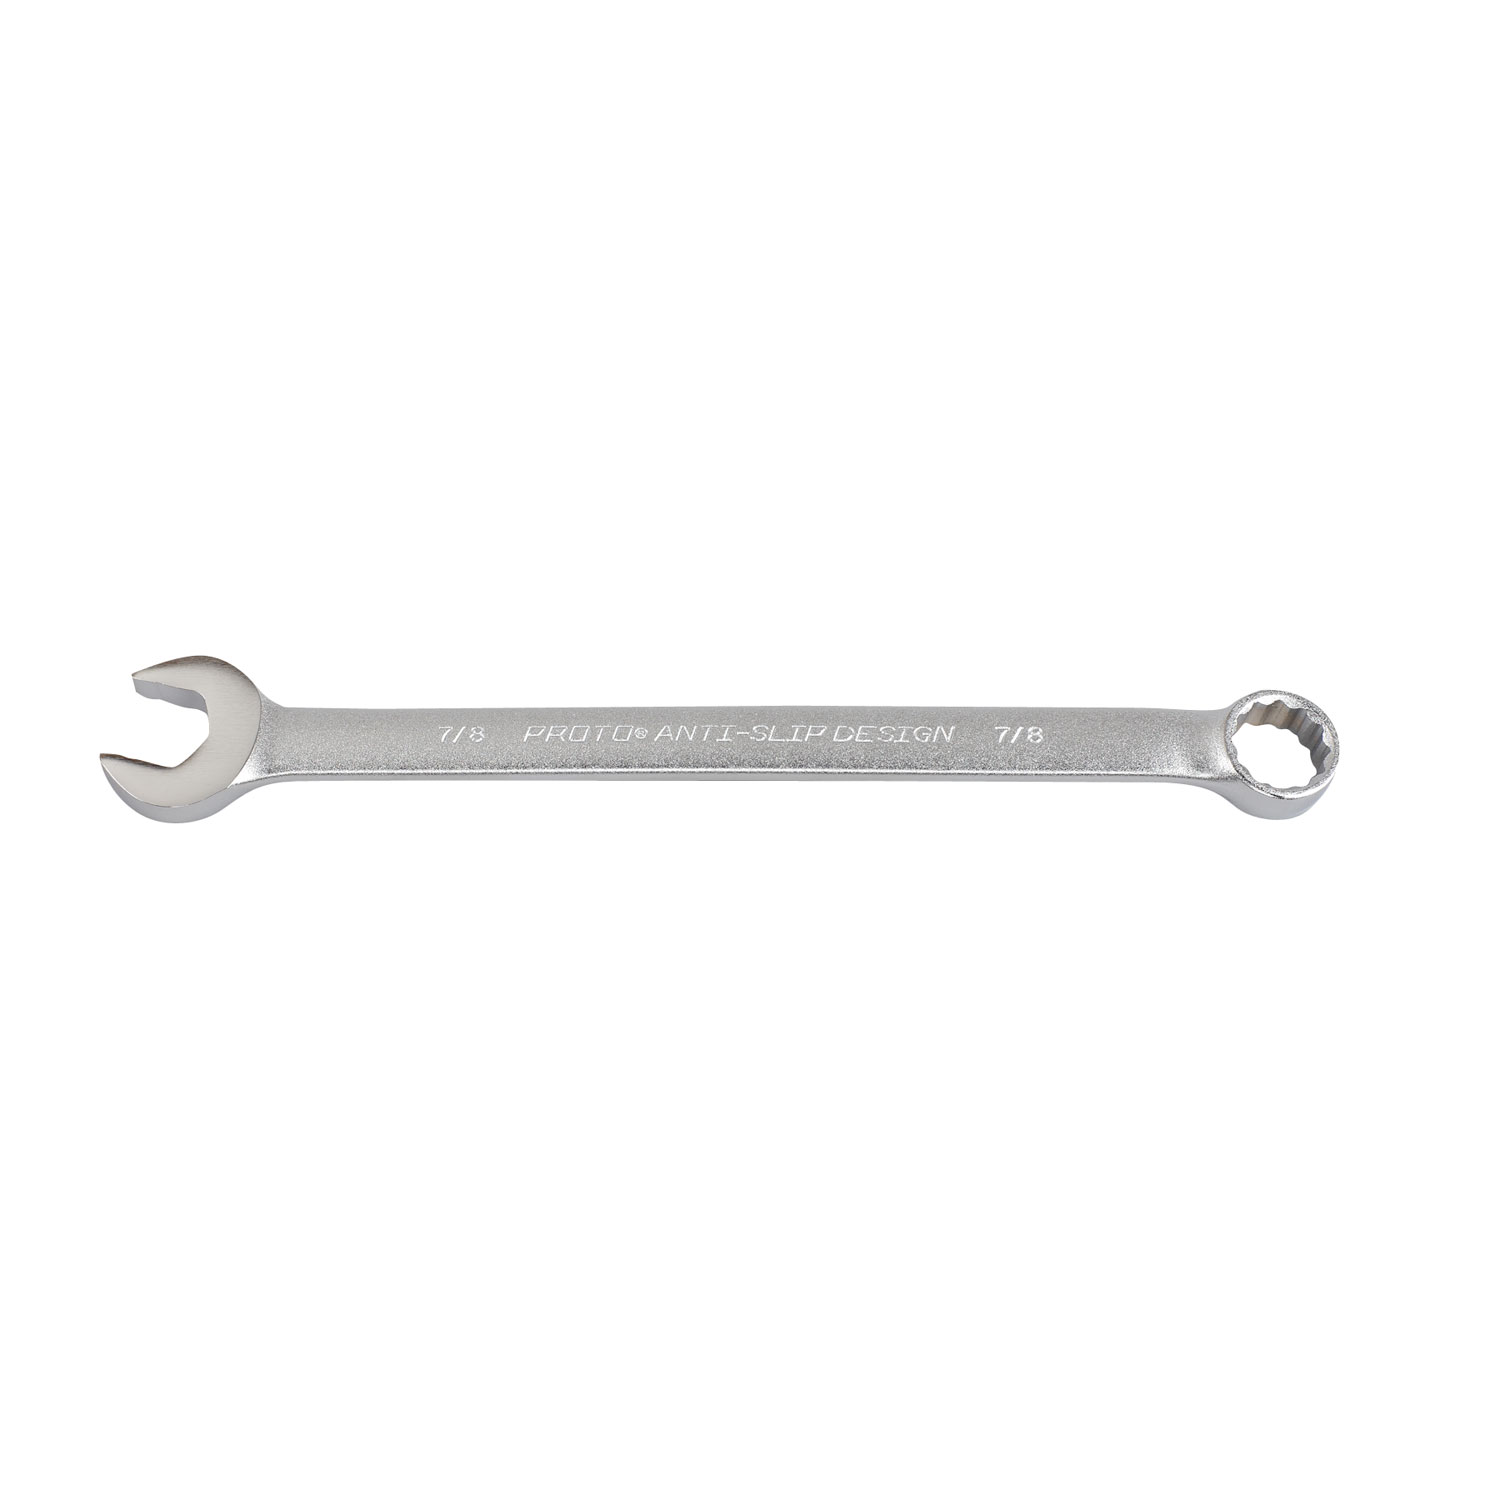 PROTO Combination Wrench, 12 1/2 Long, 7/8 Opening, 12-Point Box